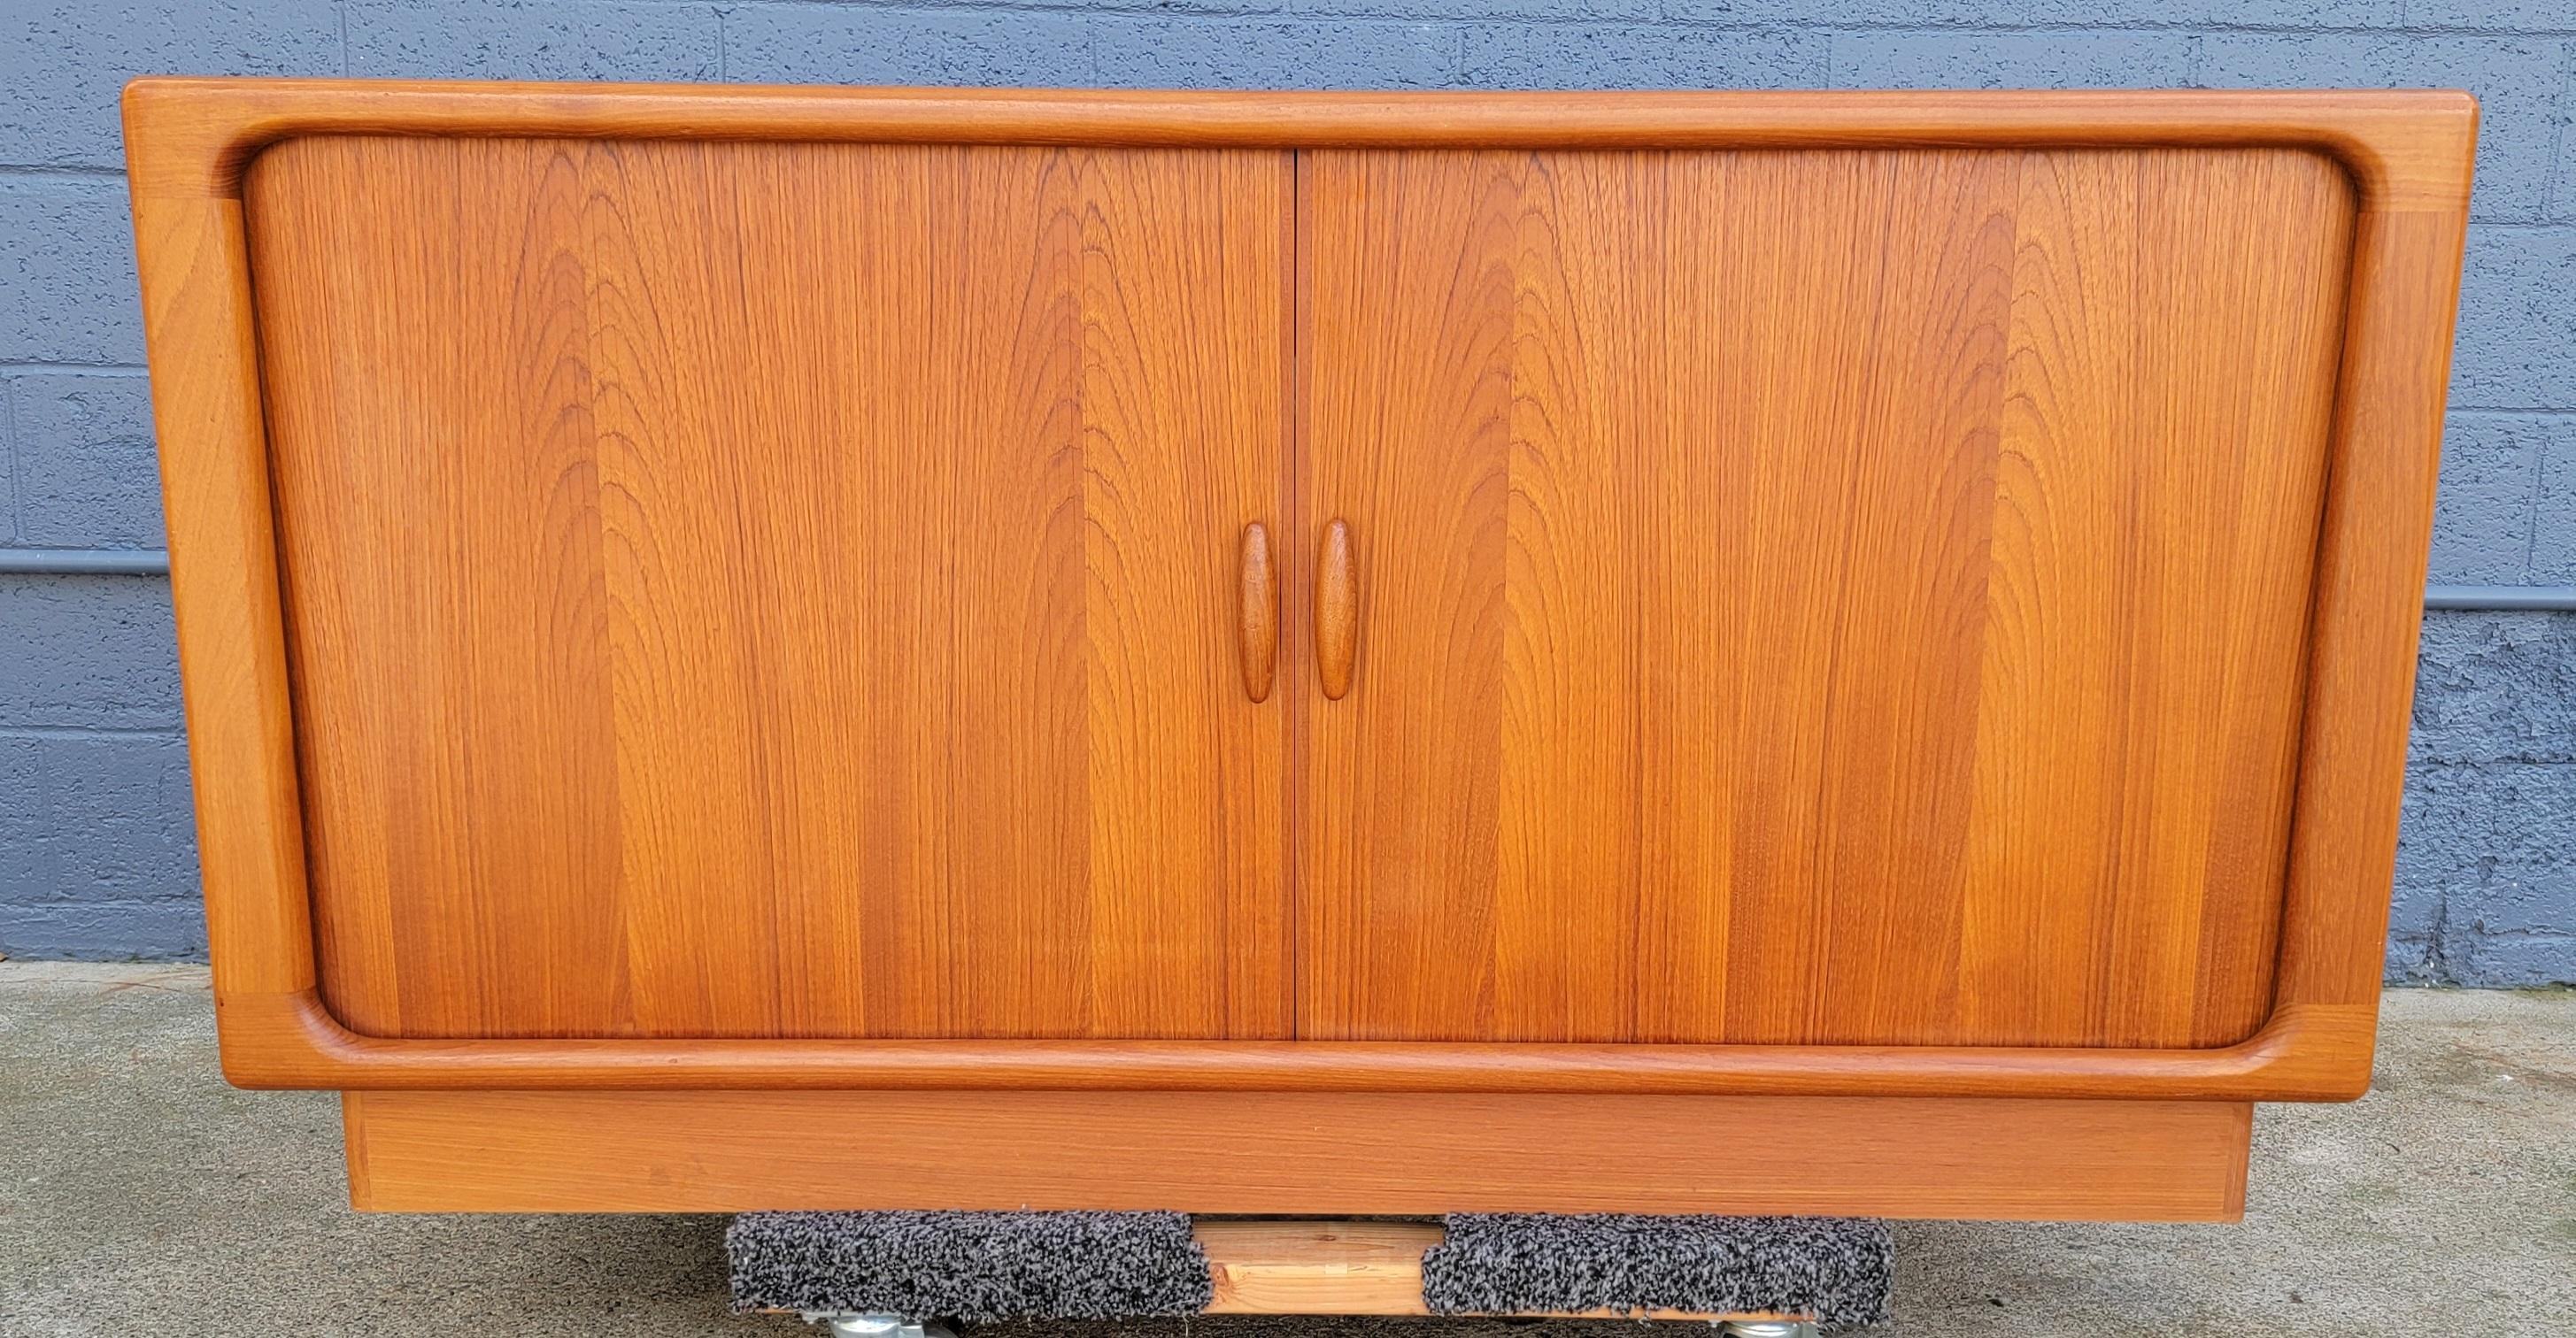 Classic teak Danish Modern credenza with a fitted interior and sliding Tambour doors. Exceptional original condition and finish. Crafted by Dyrlund Furniture of Denmark. Book-matched wood grain construction. Substantial credenza with fine